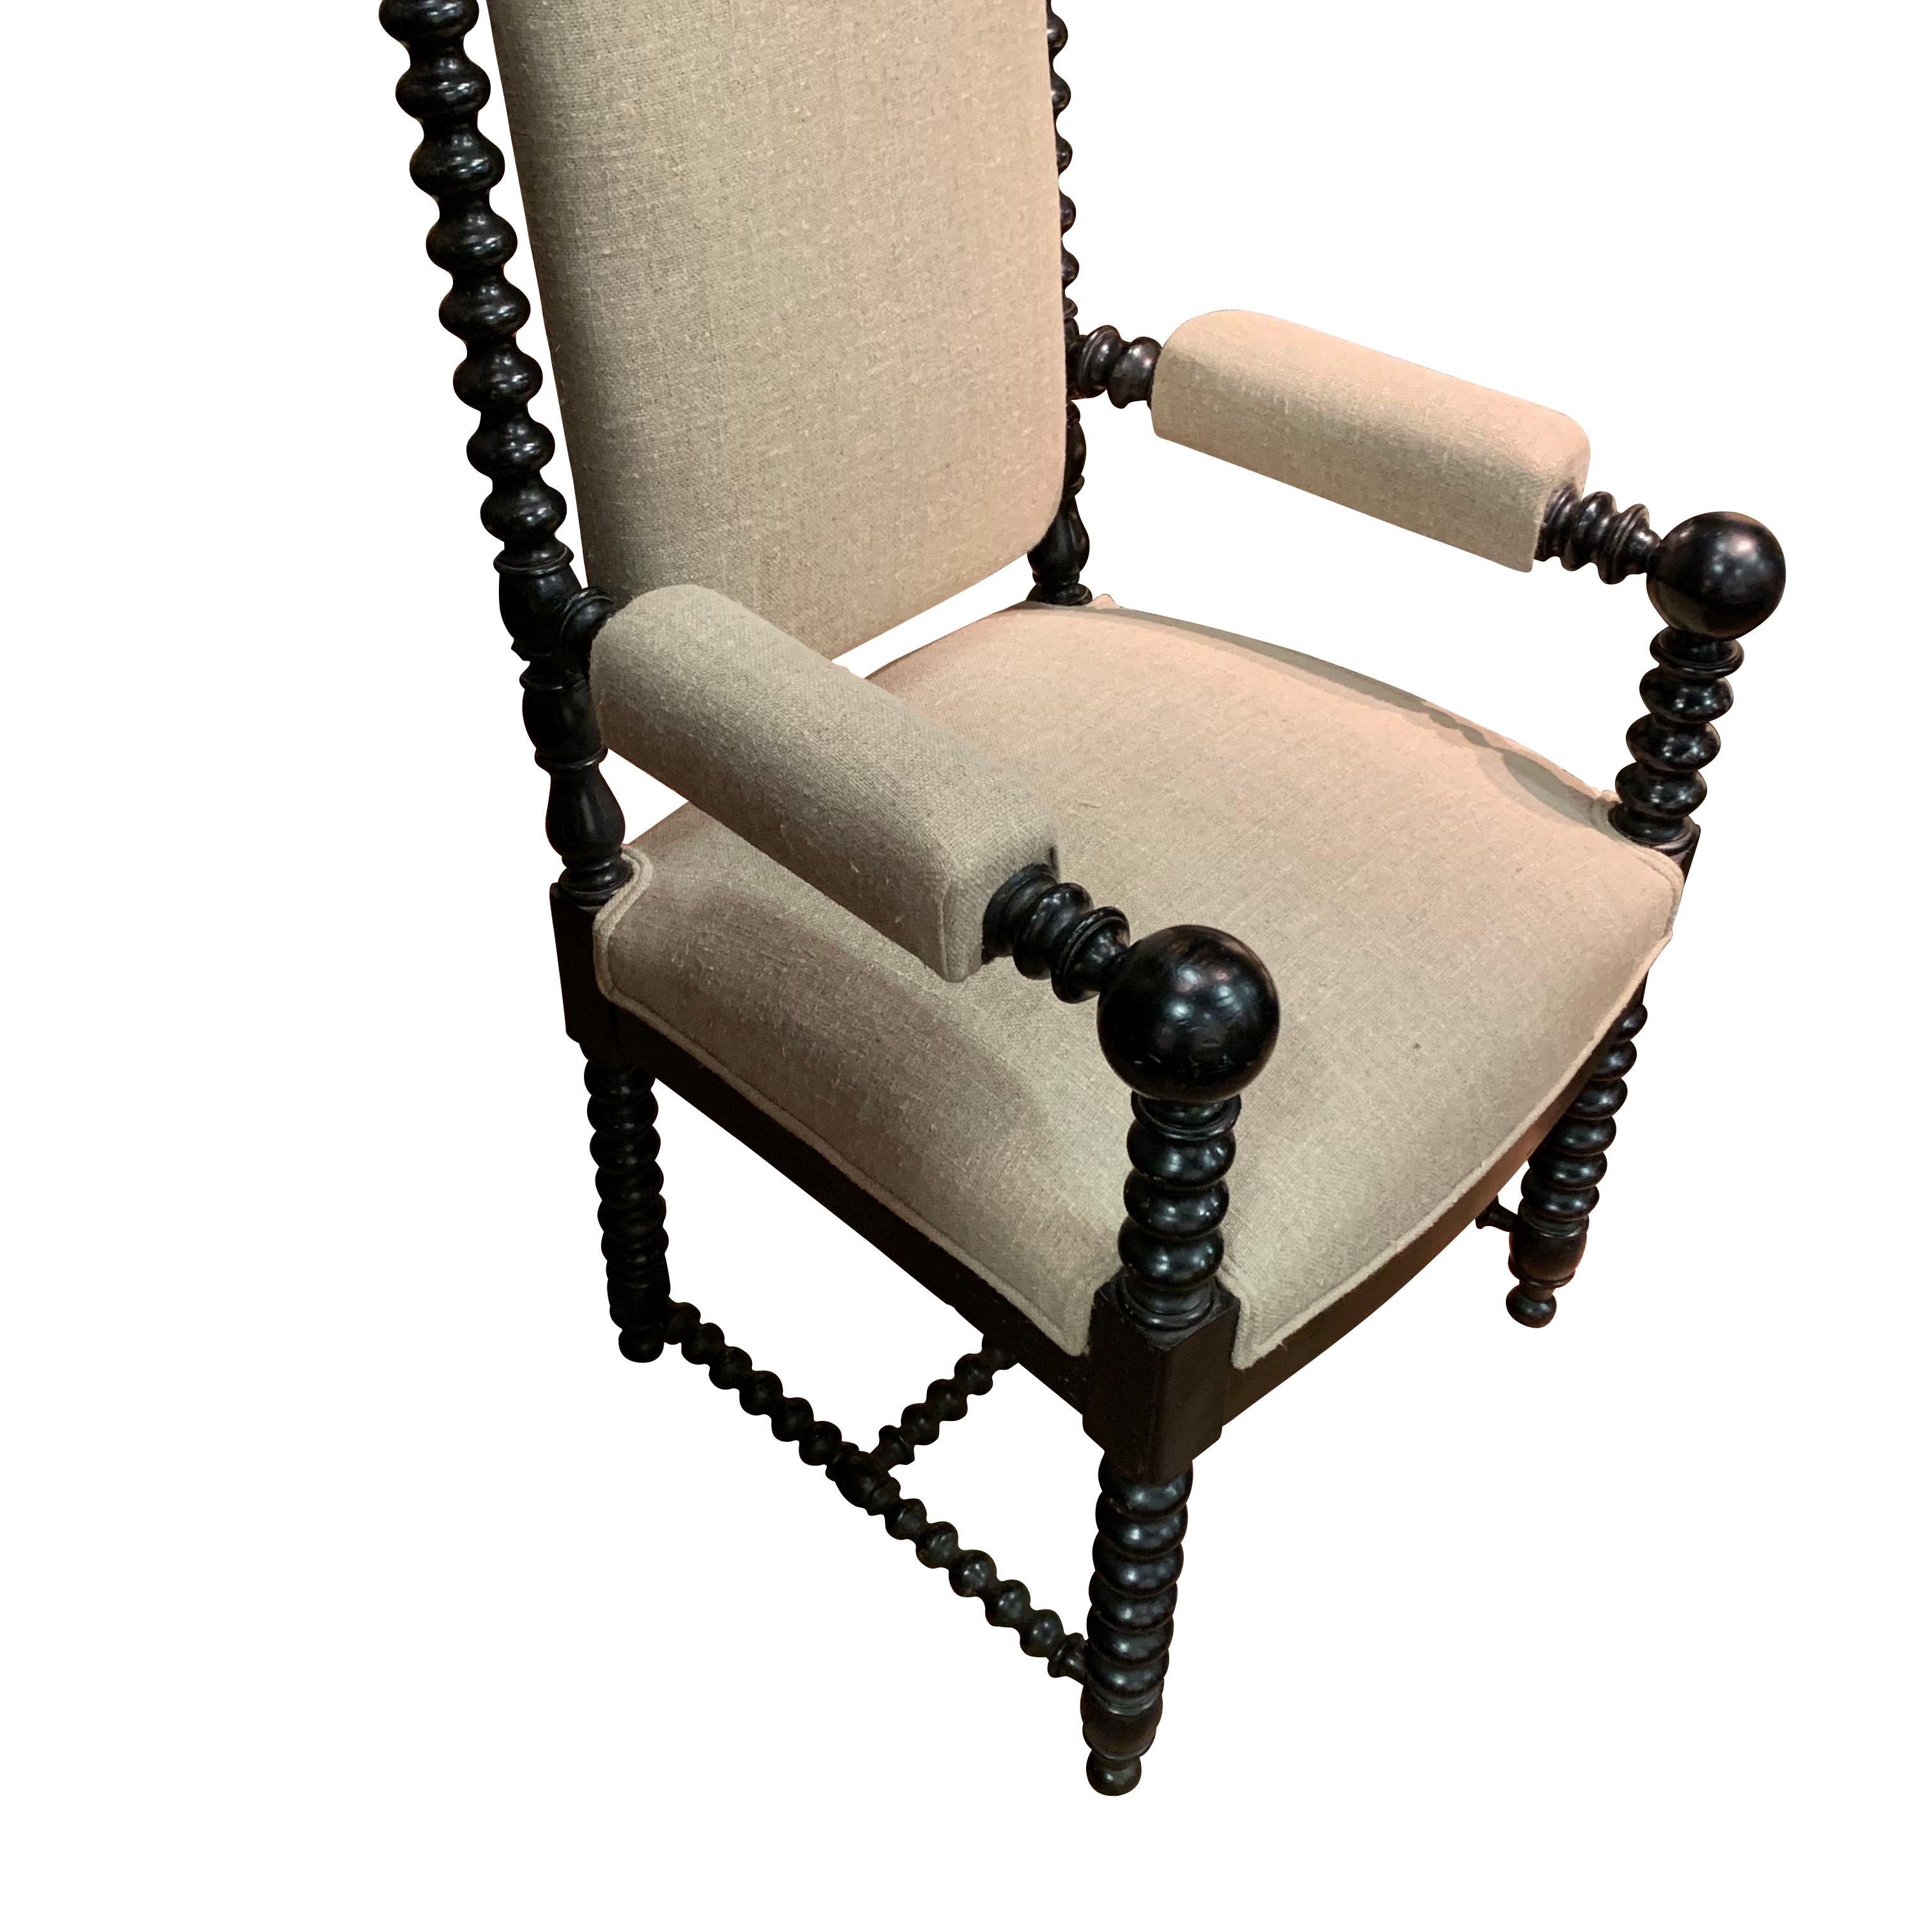 19th century French pair of ebonized ball armchairs with traditional spindle frame
Decorative finials atop sides of chair
Newly reupholstered back and seat in linen. 
Arms are also upholstered.

   